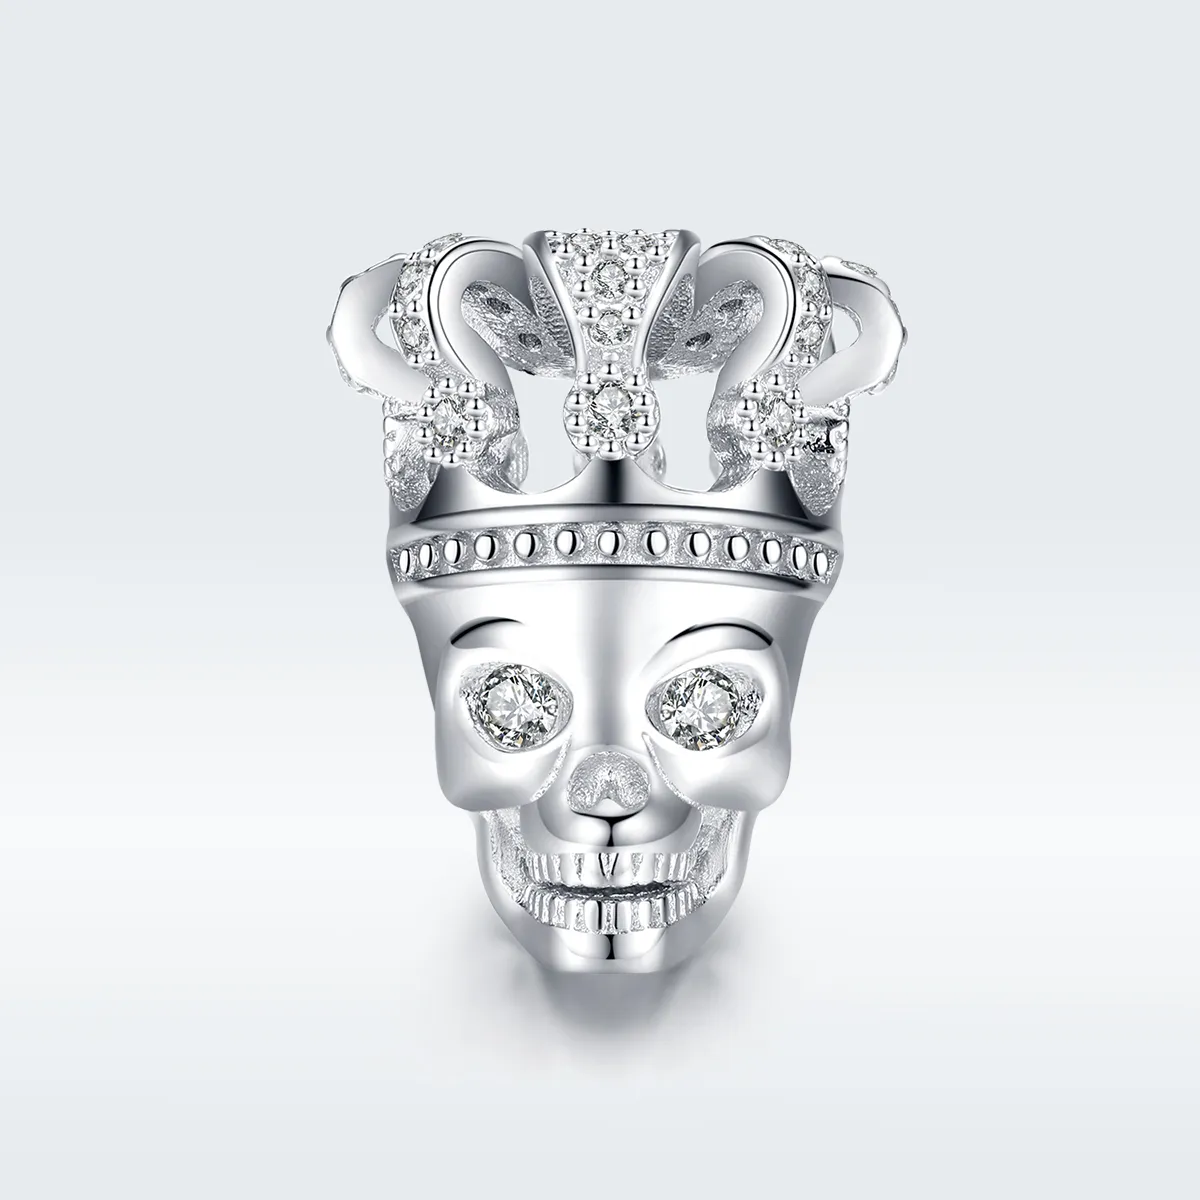 Pandora Style Silver Skull With Crown Charm - SCC1361